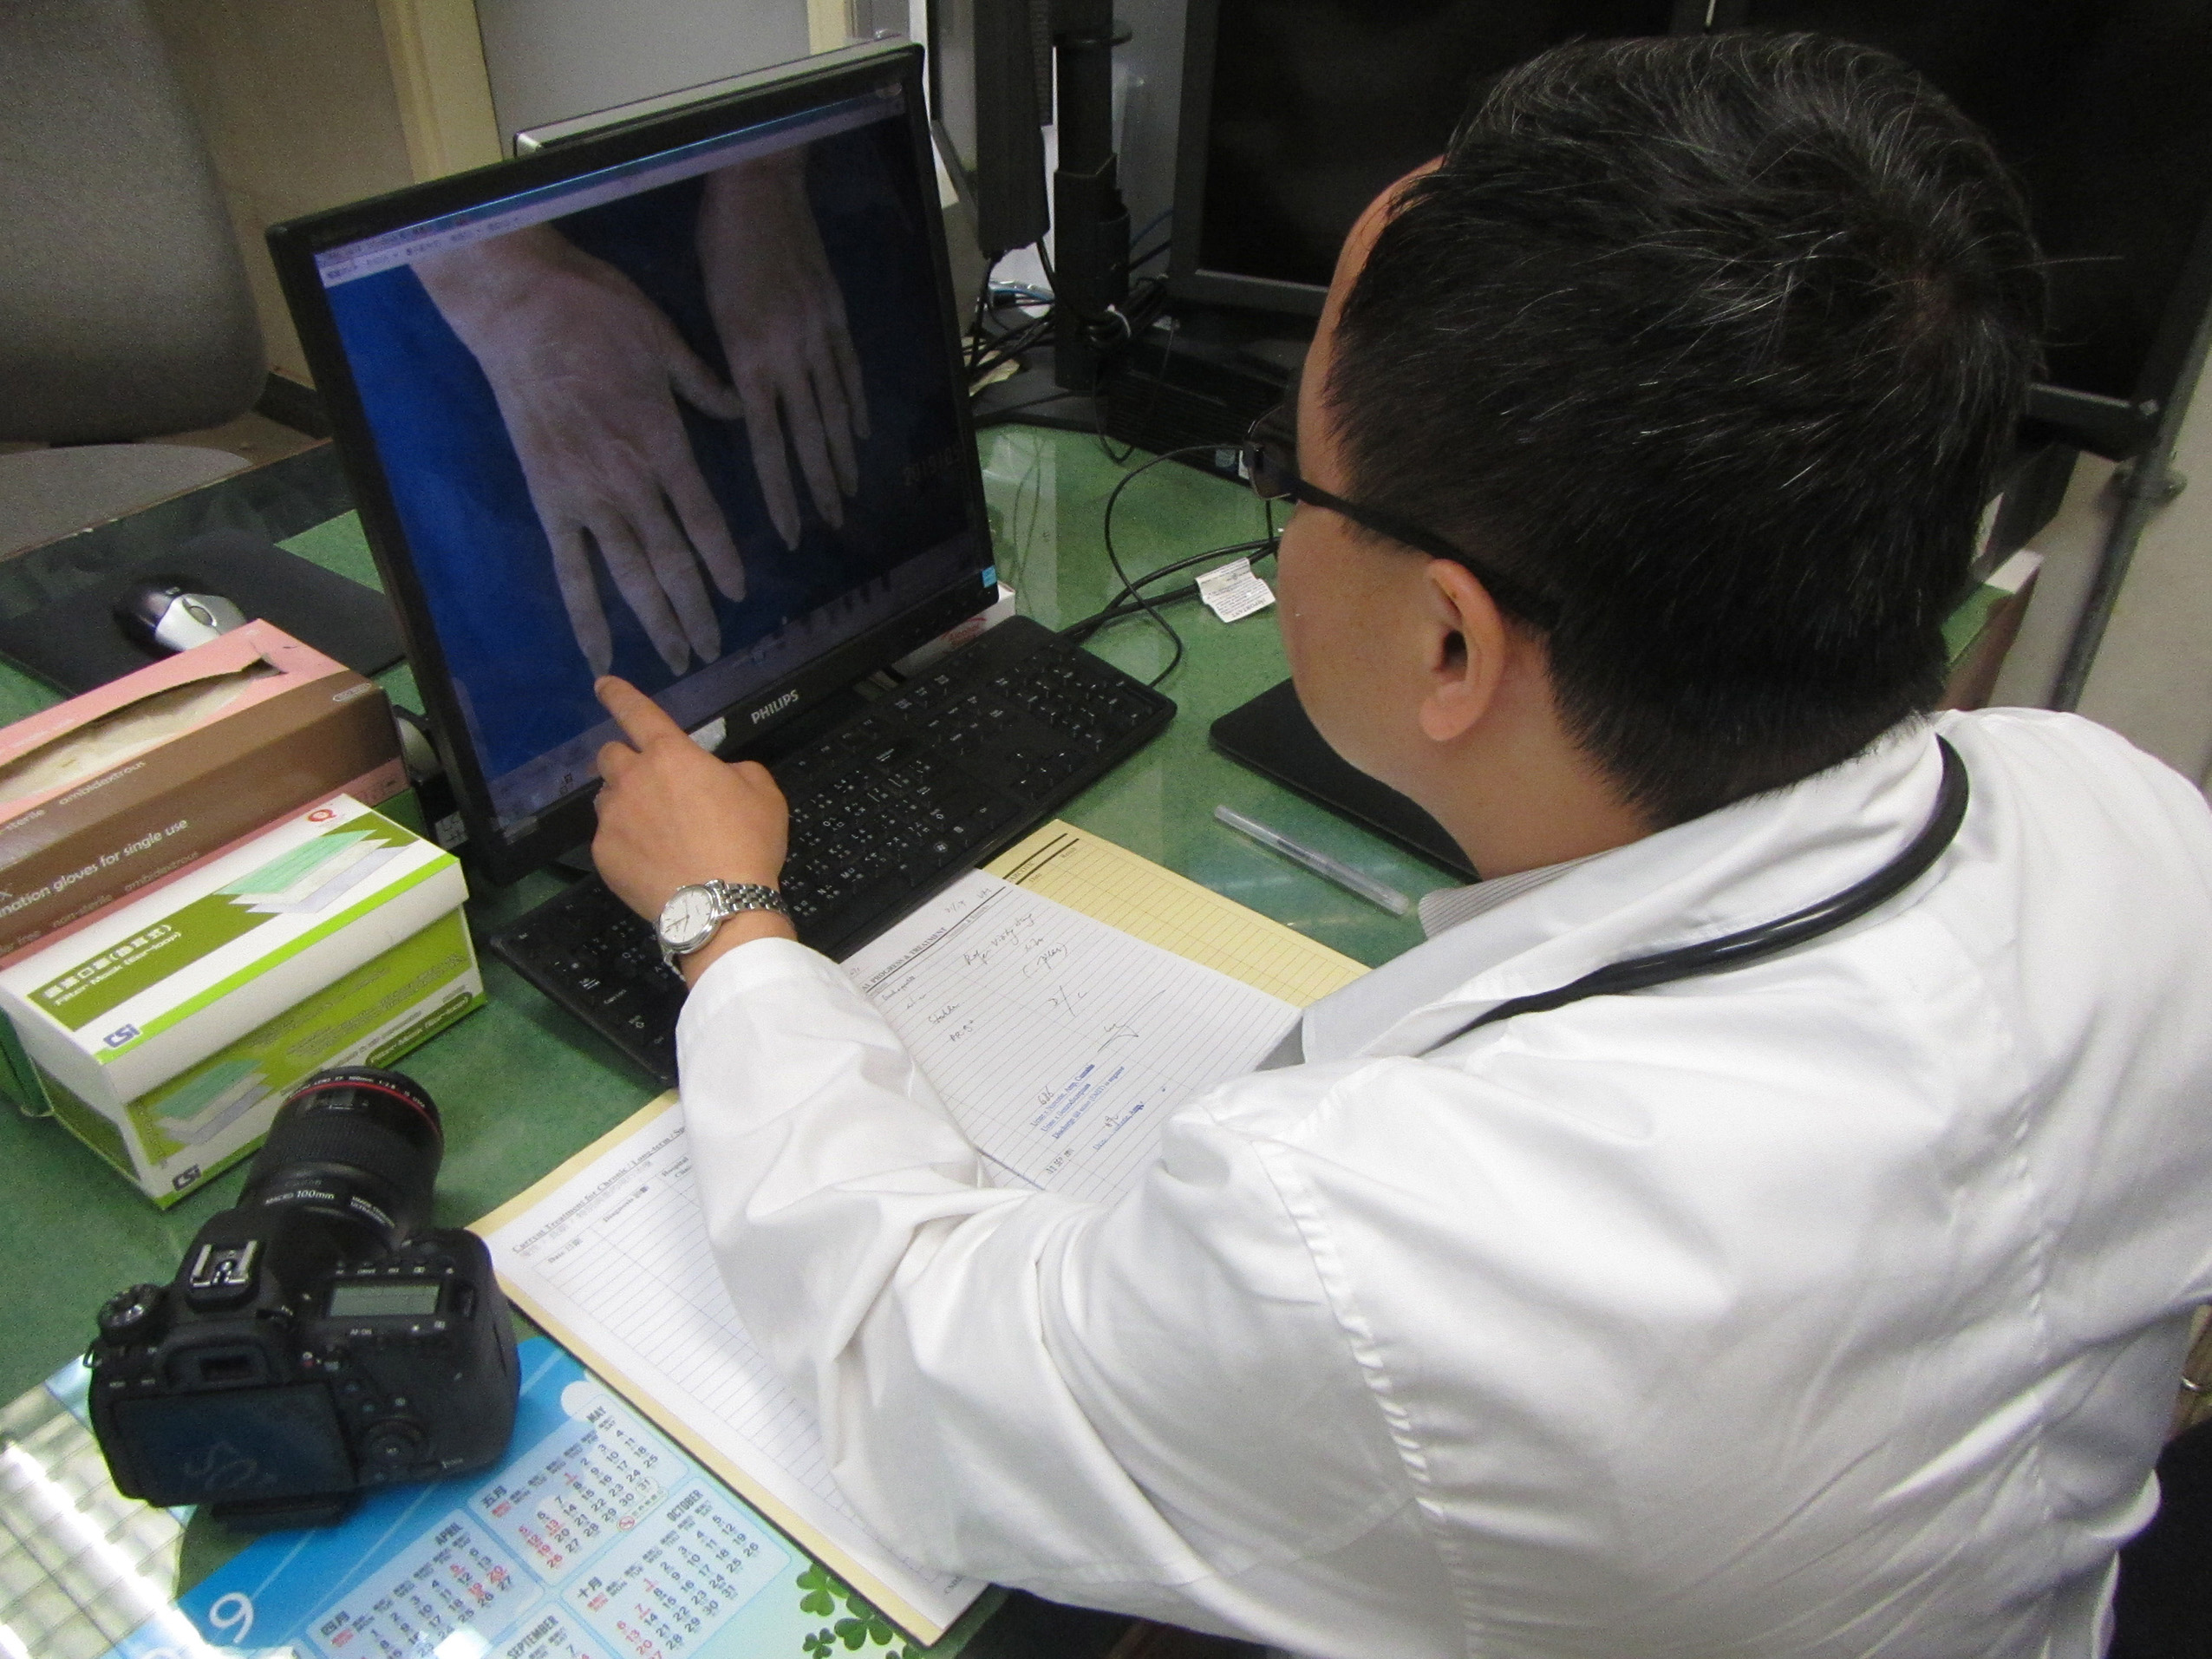 Photo 2 - Working in collaboration with the Social Hygiene Clinic of the Department of Health, the Department has conducted trial dermatological telemedicine consultation for persons in custody at Hei Ling Chau Correctional Institution and Hei Ling Chau Addiction Treatment Centre since June 2018.